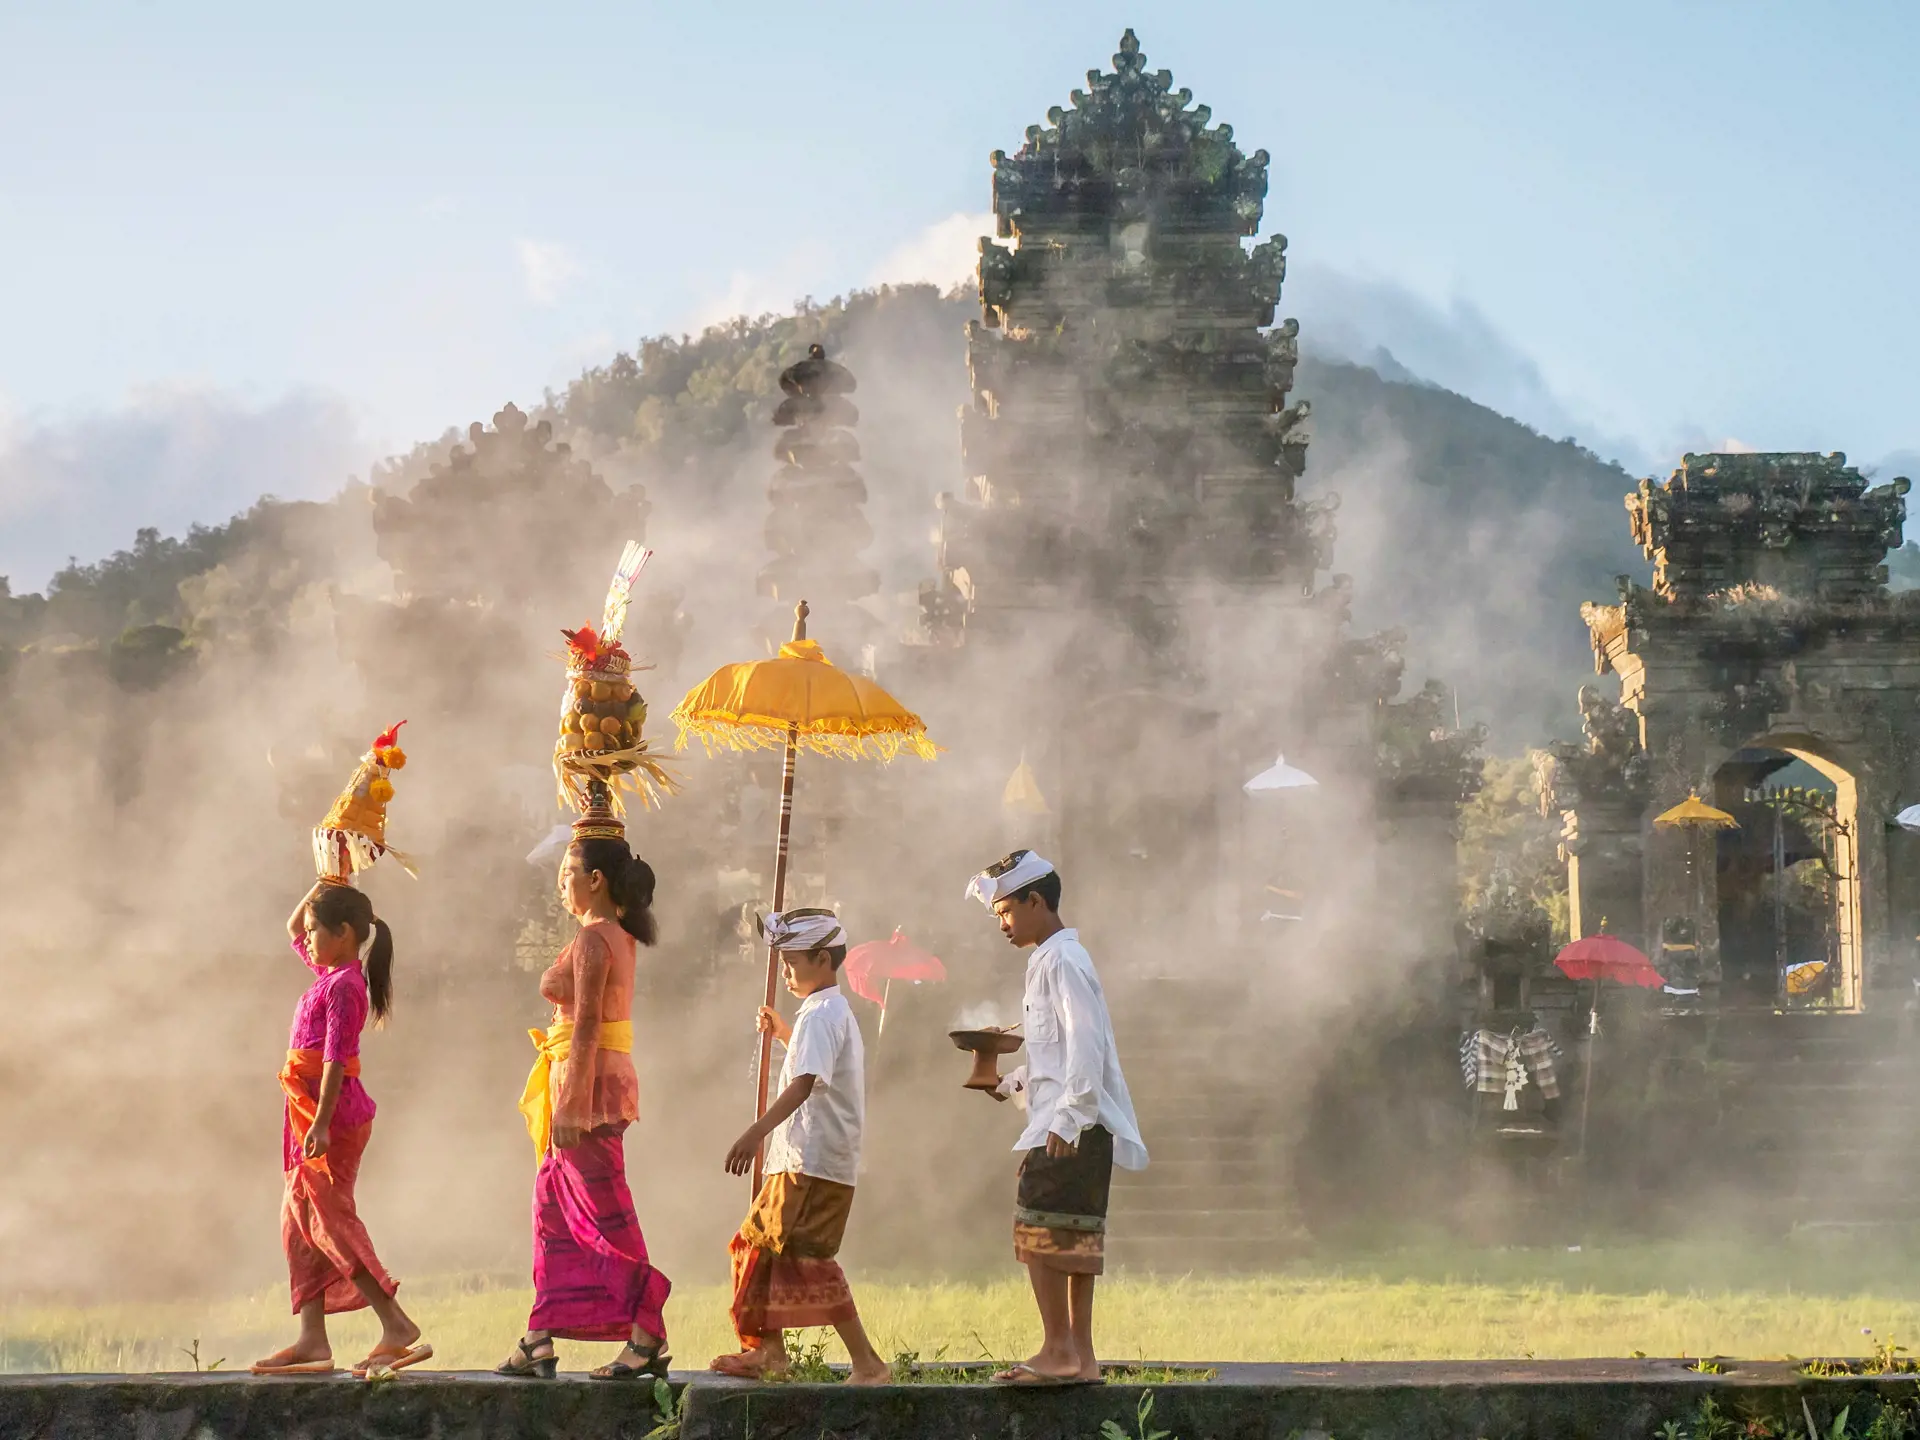 shutterstock_1053593438 Ubud, Bali - July 30, 2016. Illustrative Editorial. Showing traditional Balinese male and female ceremonial clothing and religious offerings, as a mother and children walk to a Hindu.jpg